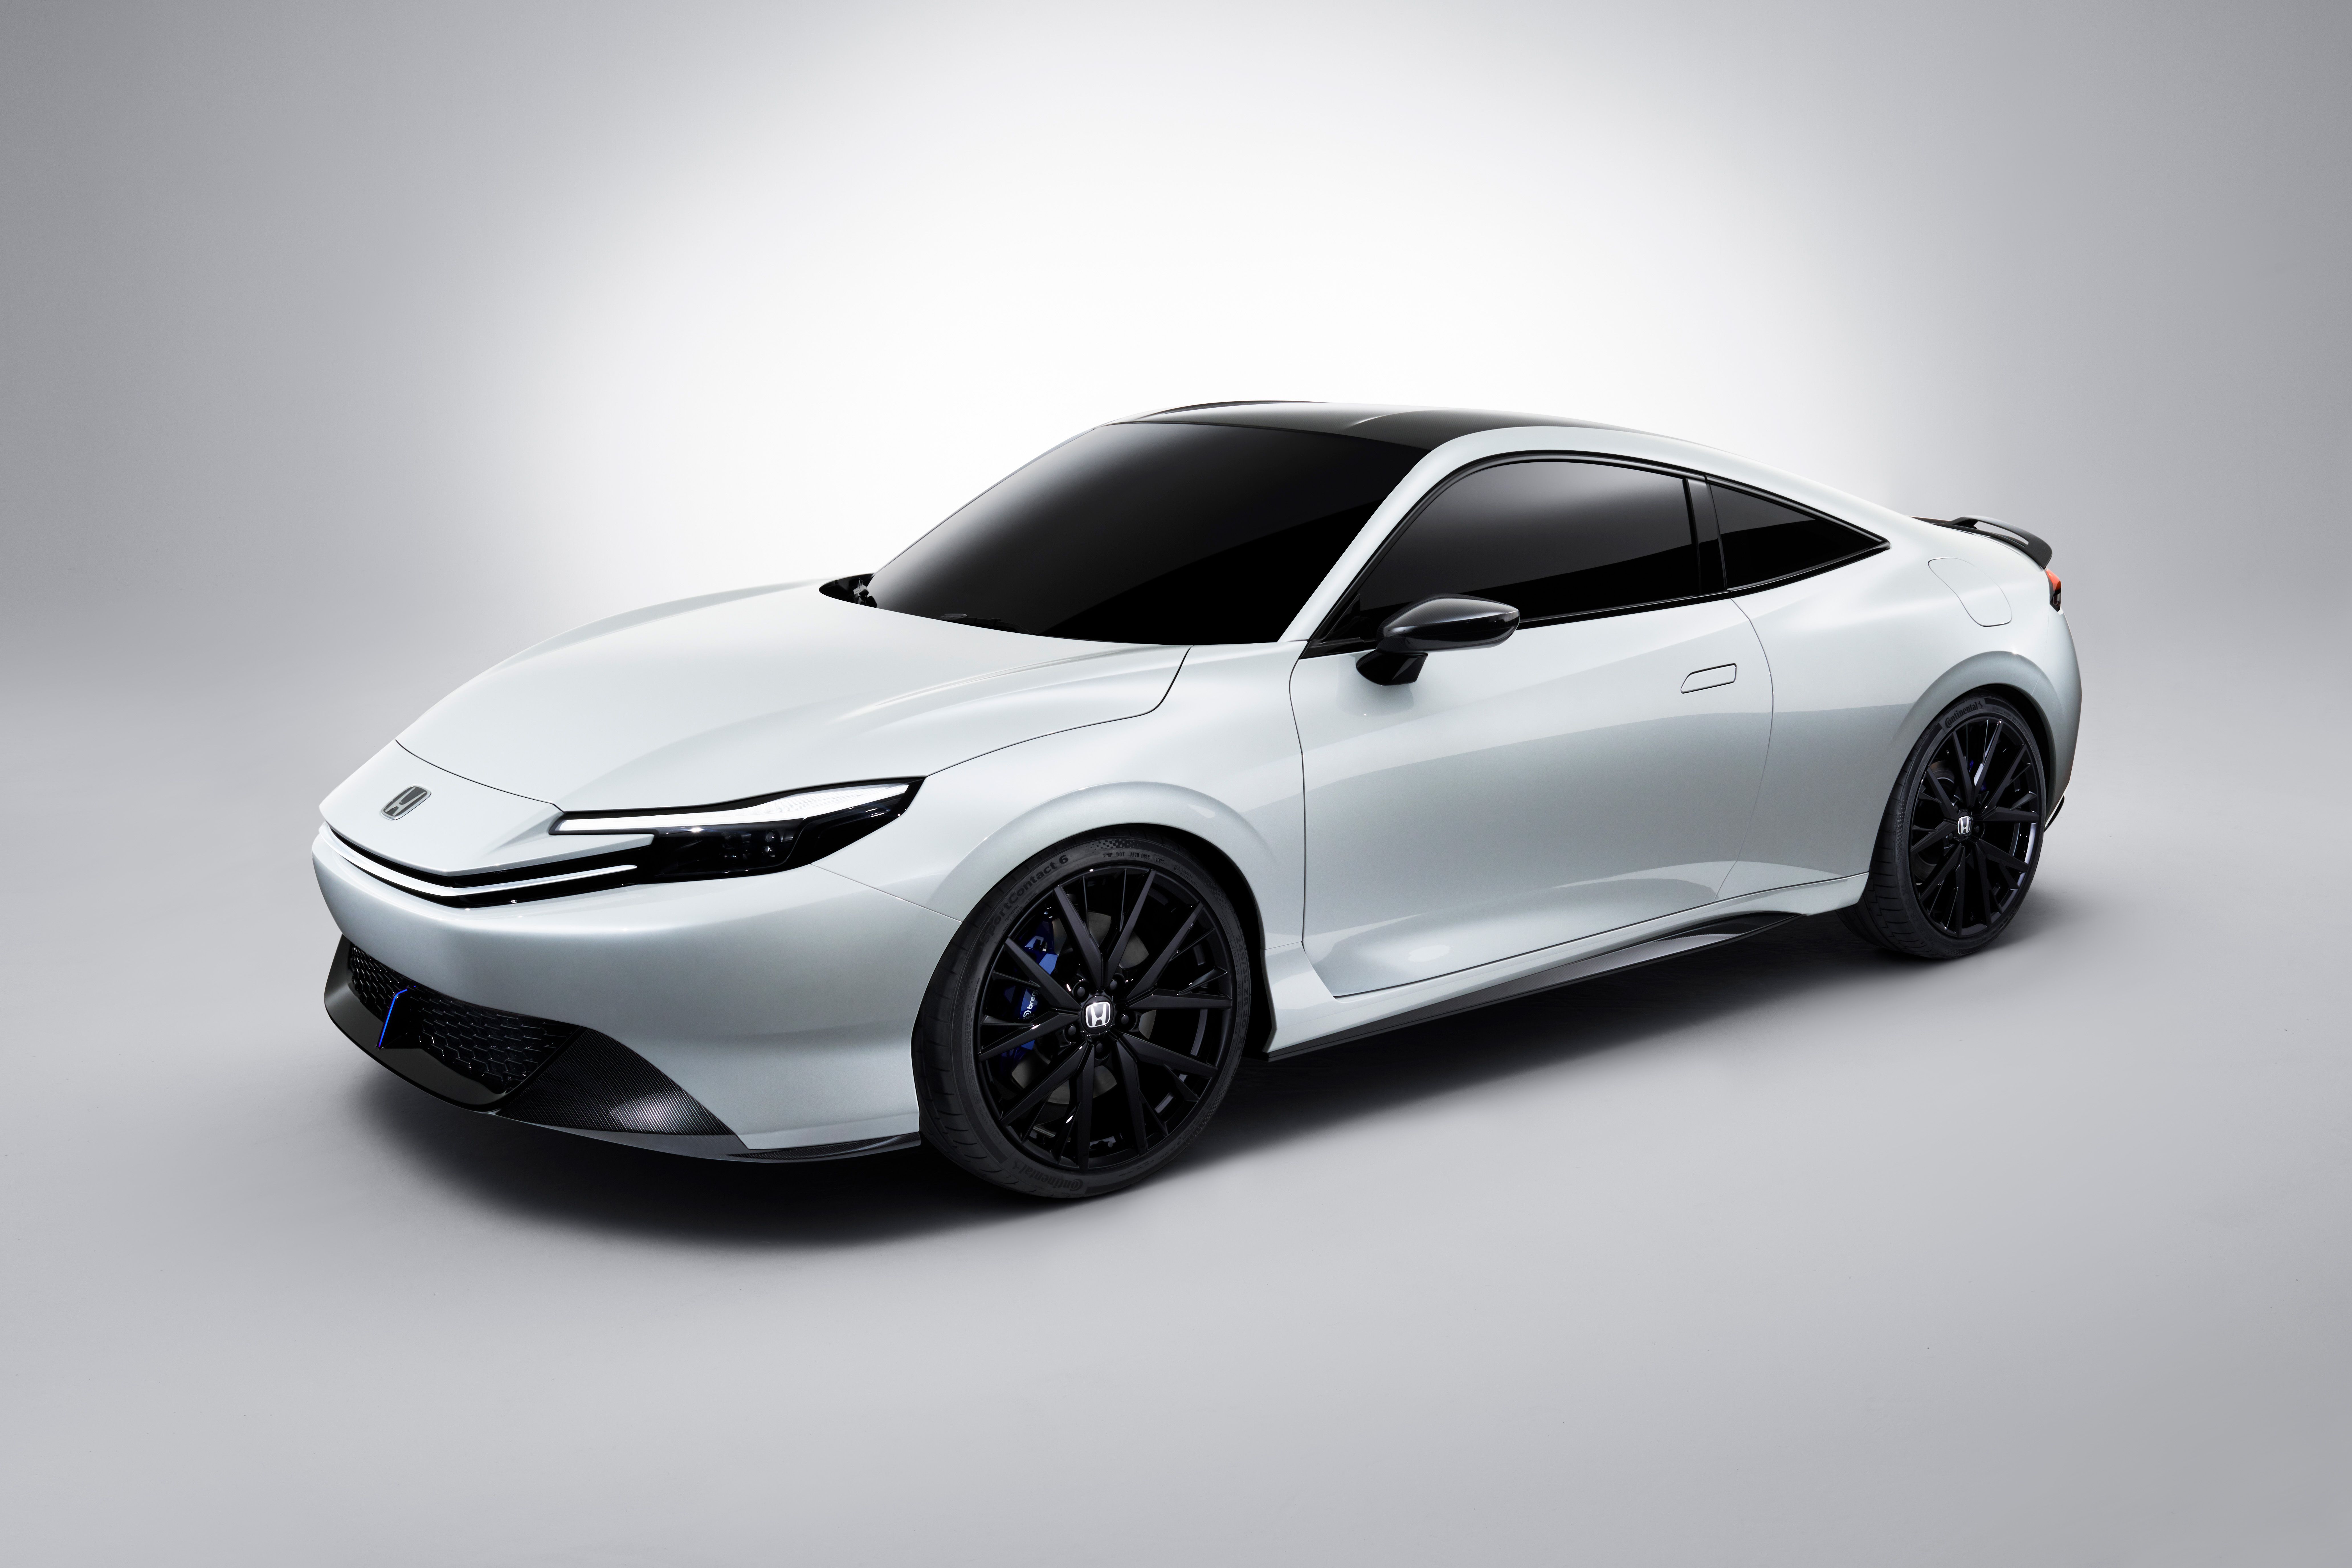 MAZDA NEWSROOM｜Mazda unveils 'MAZDA ICONIC SP' compact sports car  concept｜NEWS RELEASES